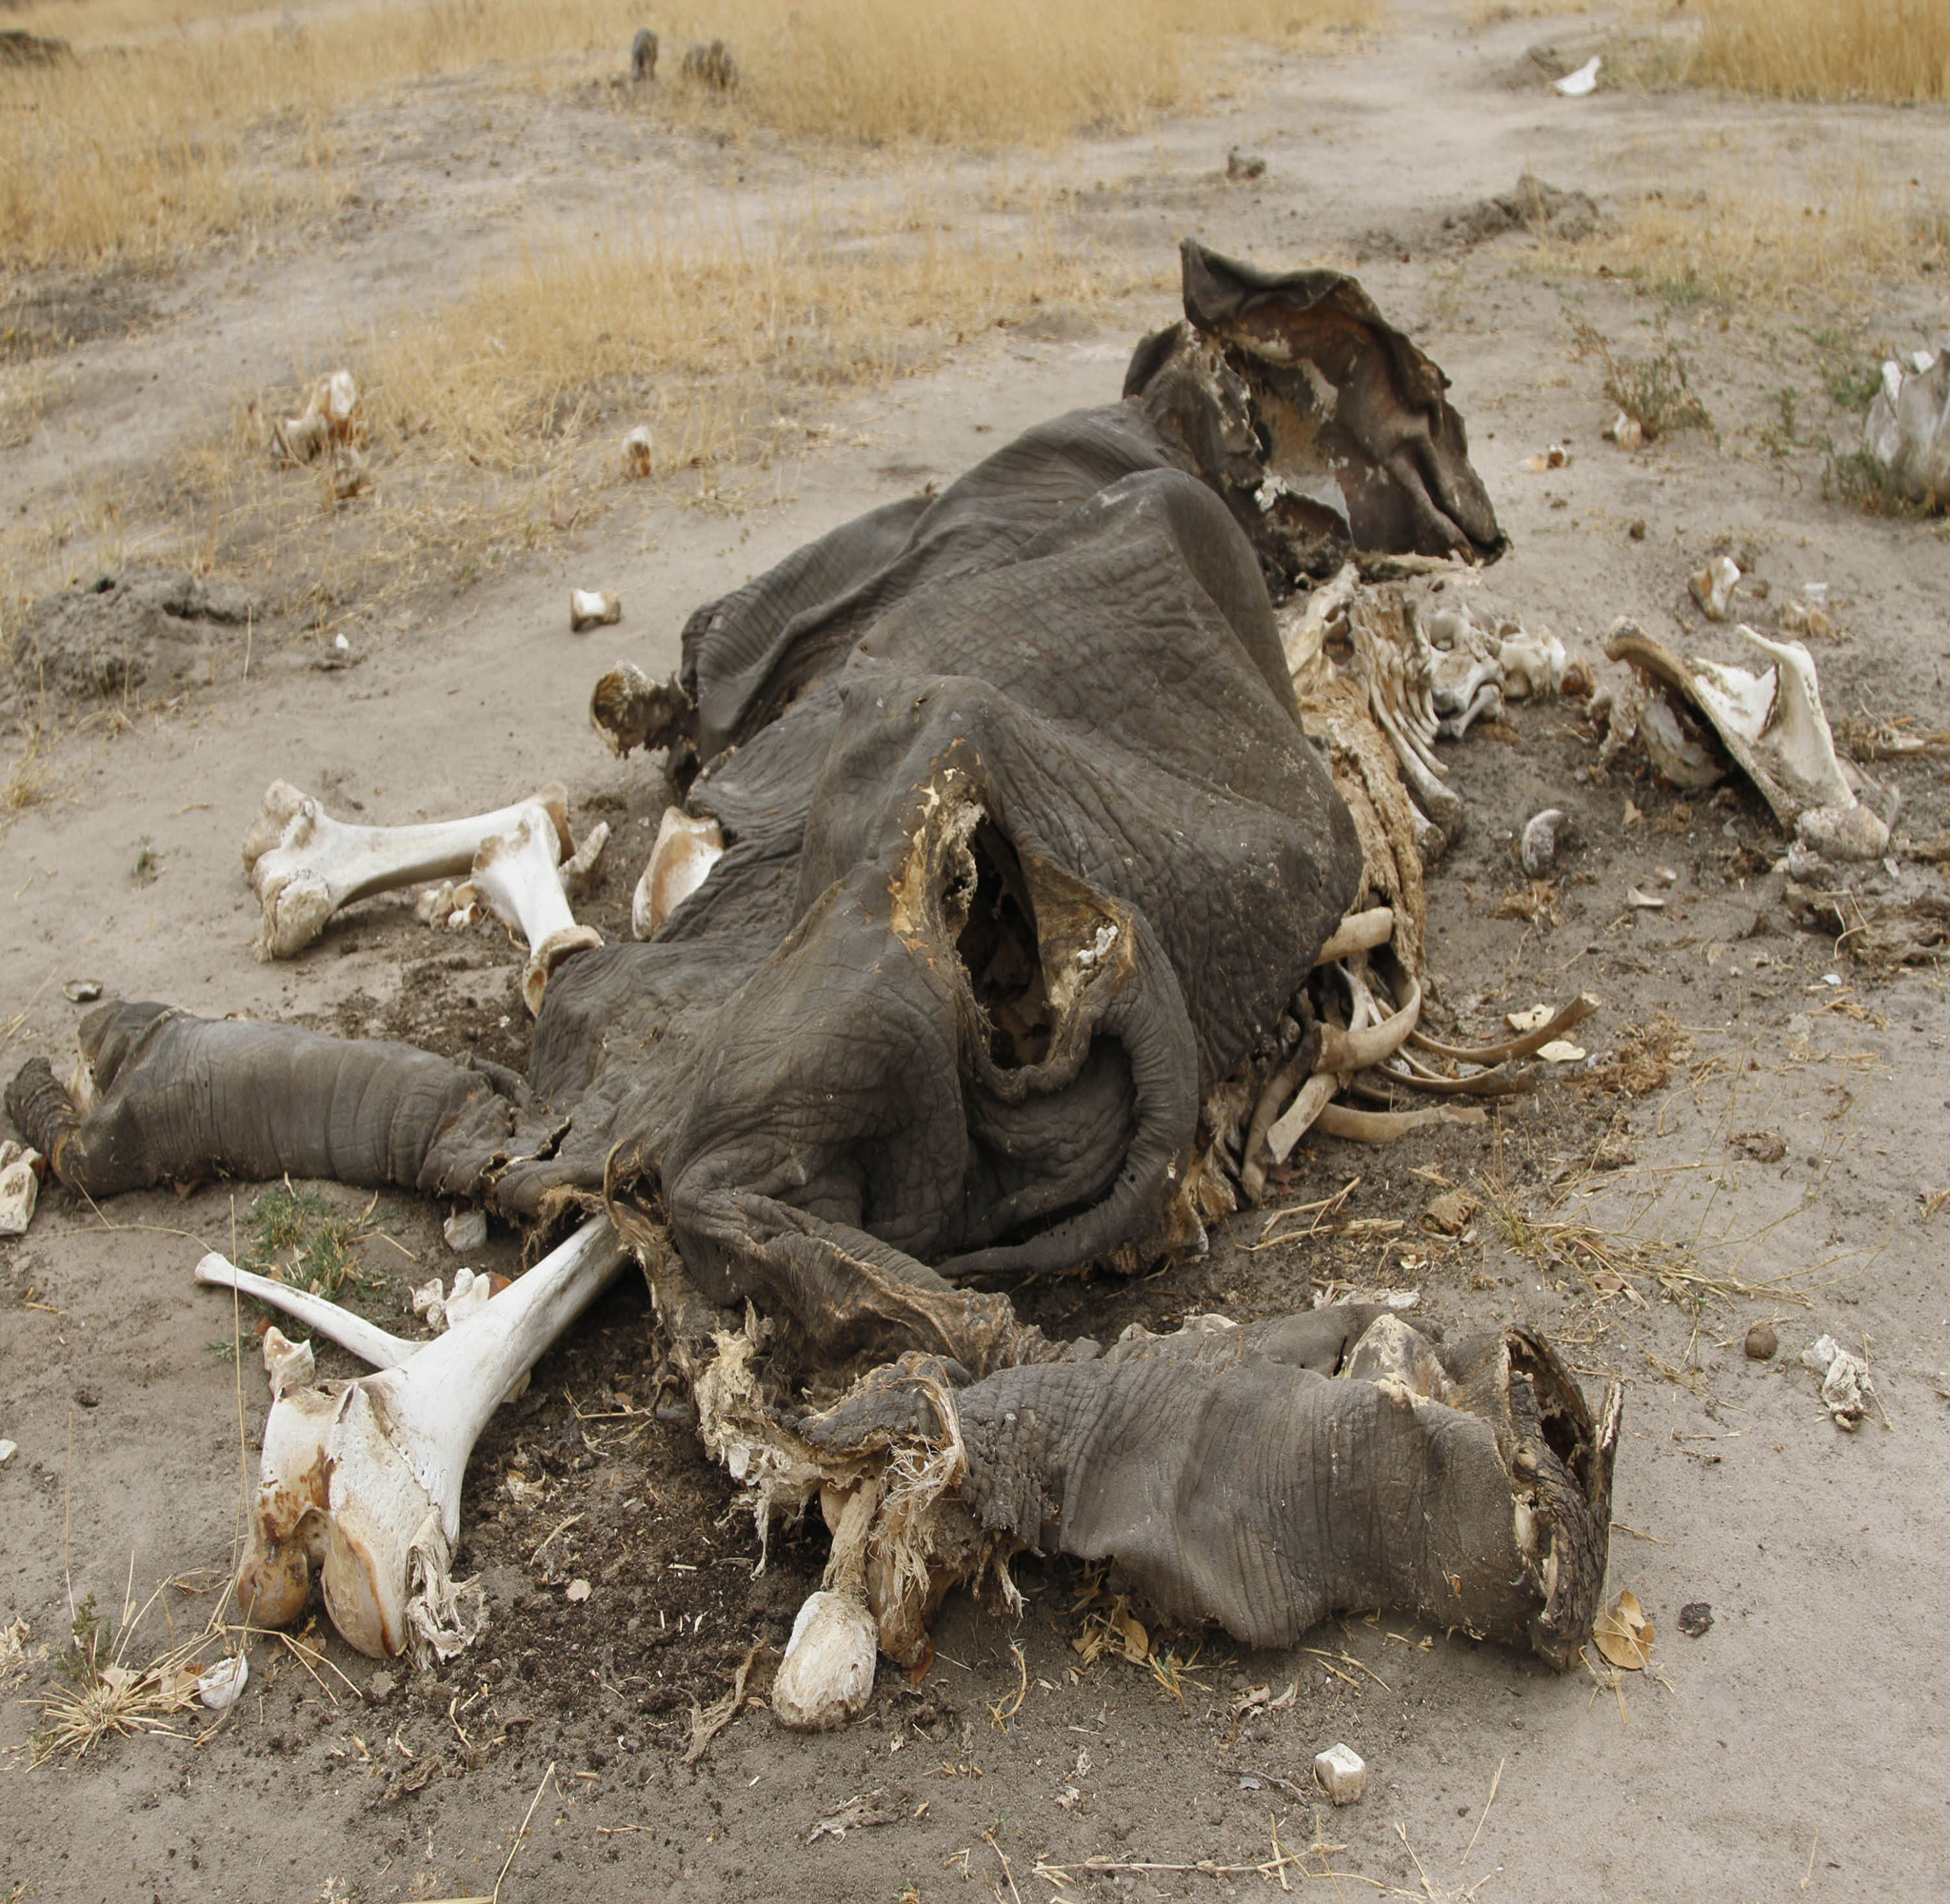 The carcass of an elephant rots after a whole herd was poisoned with cyanide in Zimbabwe